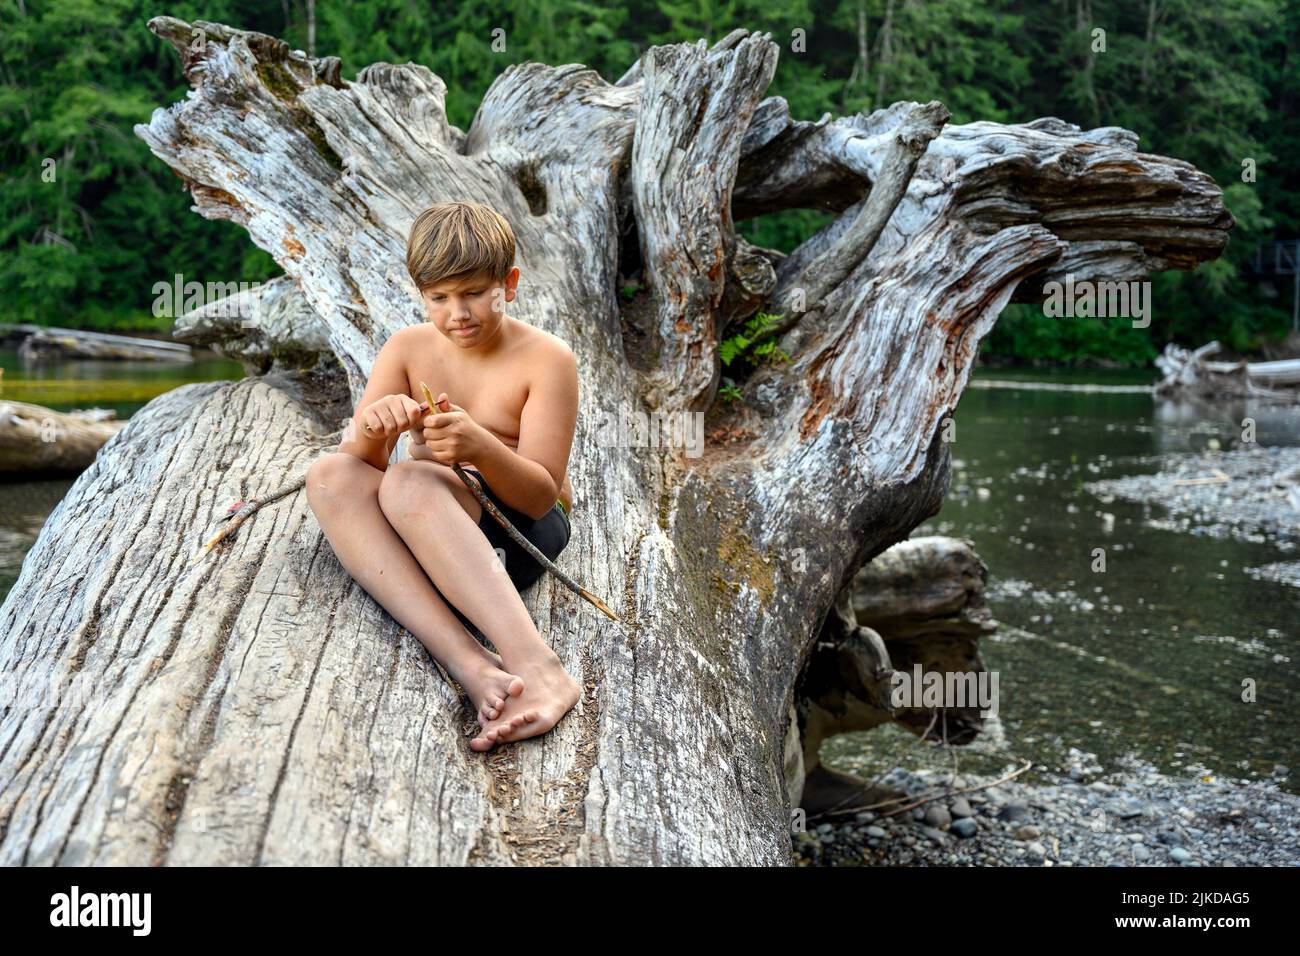 10 years old young boy at the campsite, sitting on a fallen tree trunk, and focusing on to carving a wooden stick for the grill with a small pocket Stock Photo